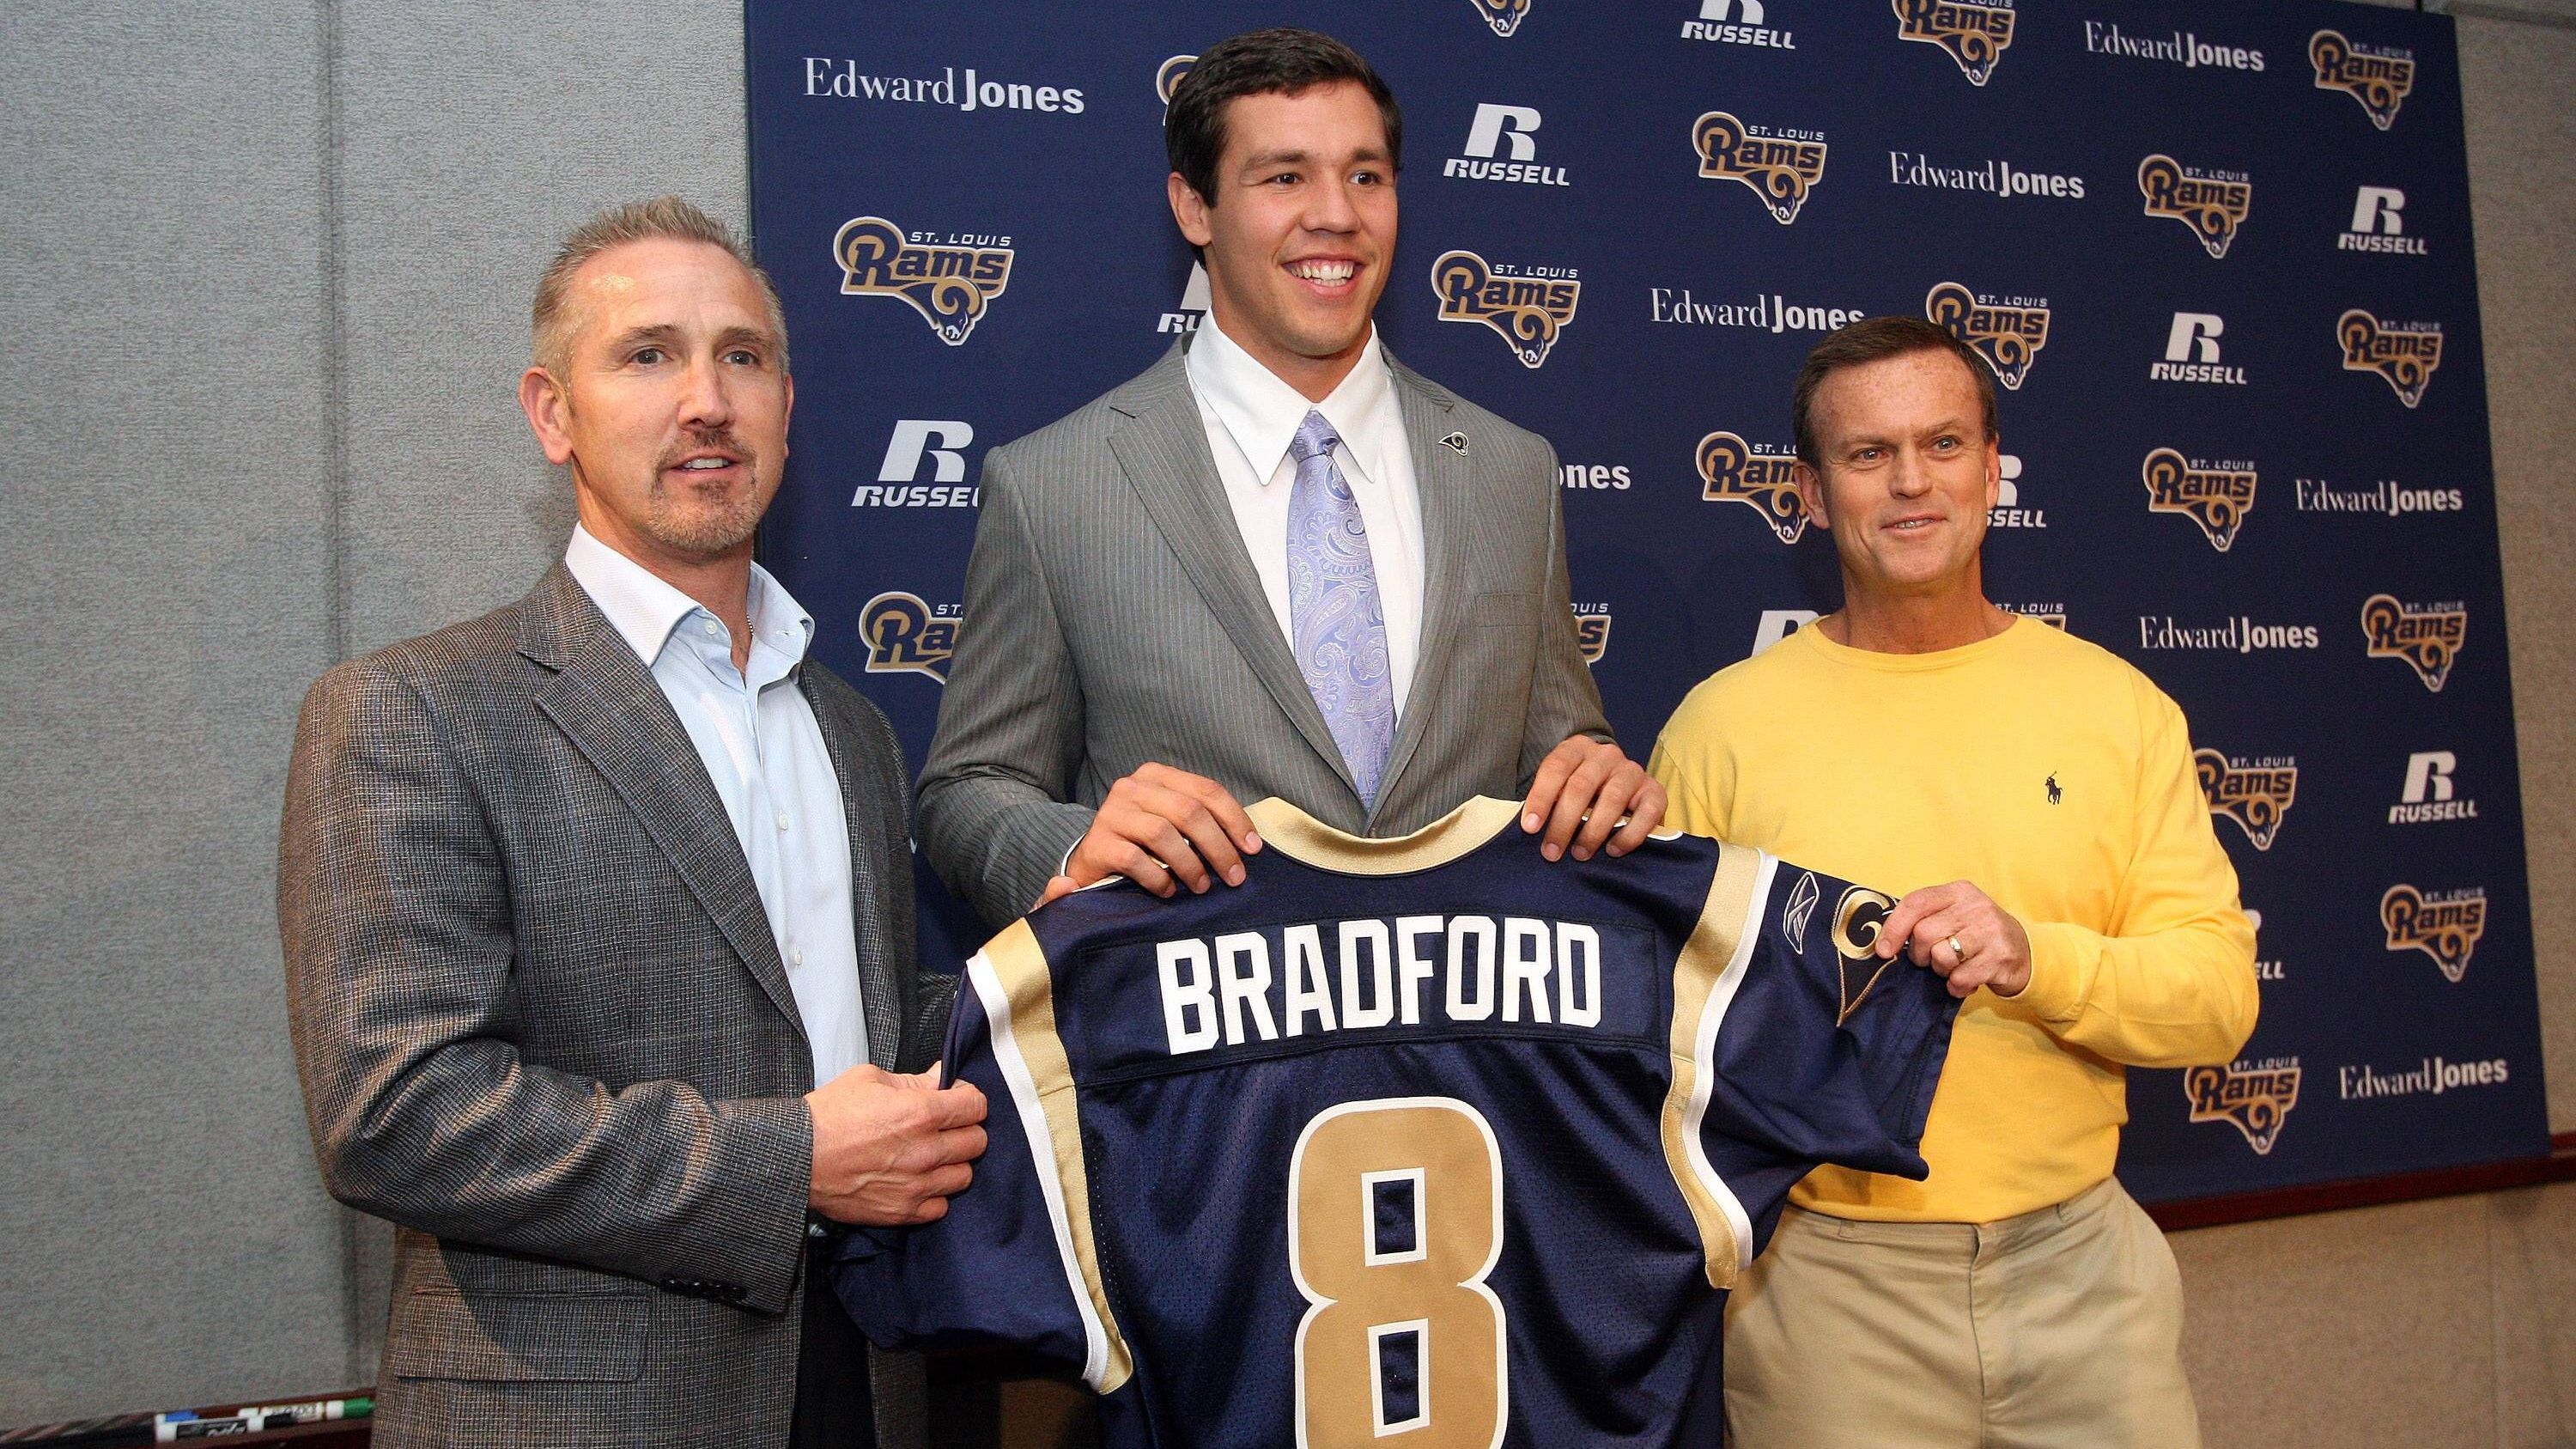 <strong>Sam Bradford - 2010</strong><br>Position: Quarterback<br>Draft-Team: St. Louis Rams<br>Erfolge: Heisman Trophy, Offensive Rookie of the Year<br>Karriereende: 2018